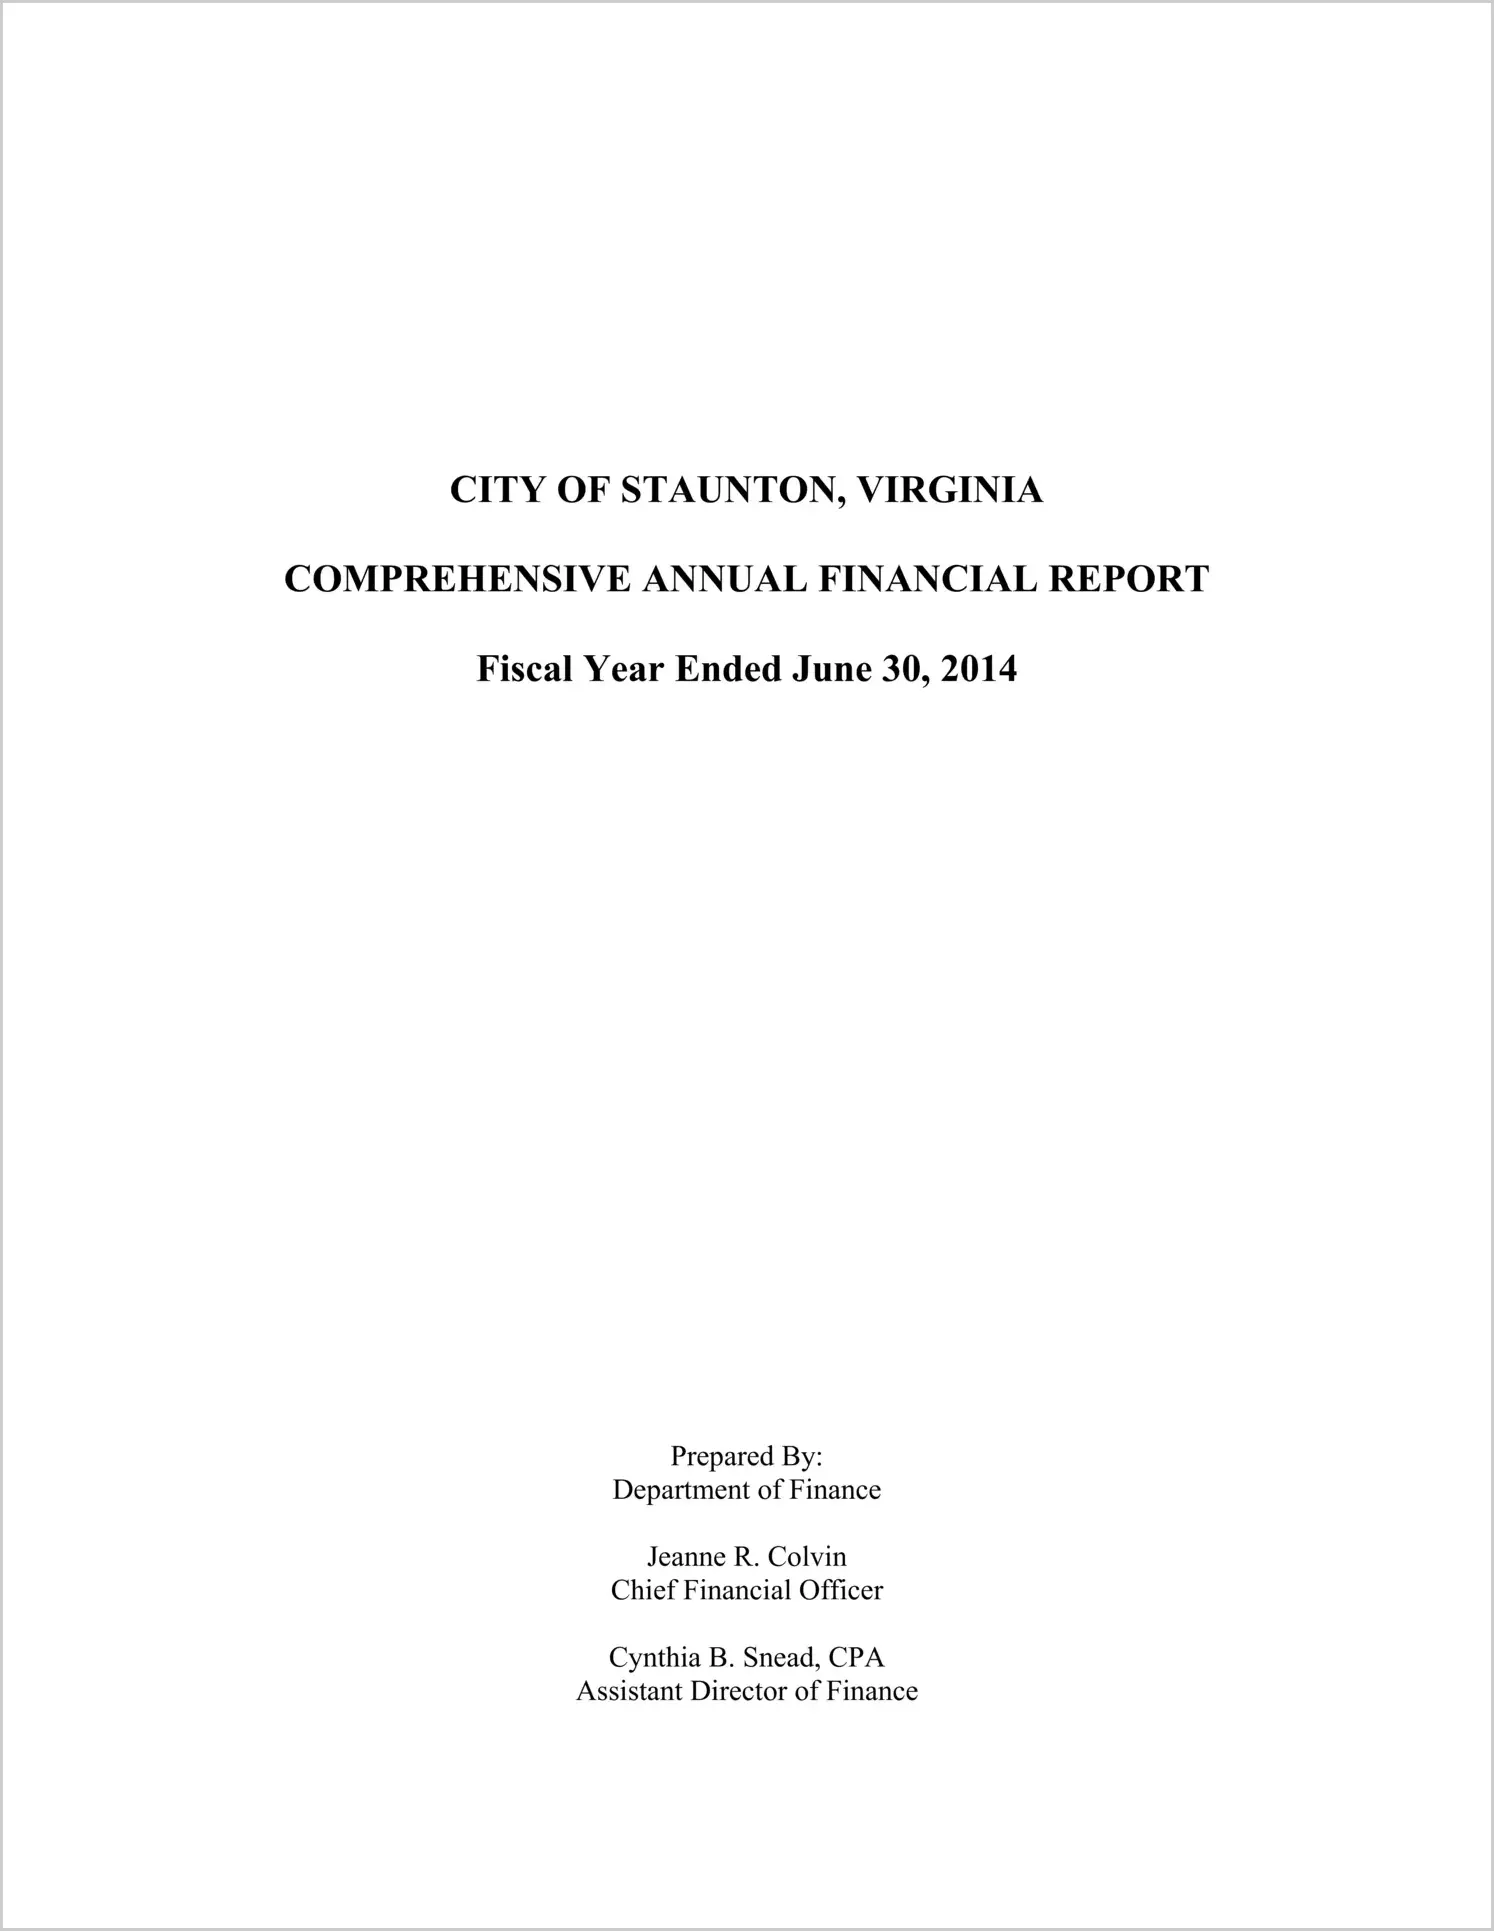 2014 Annual Financial Report for City of Staunton